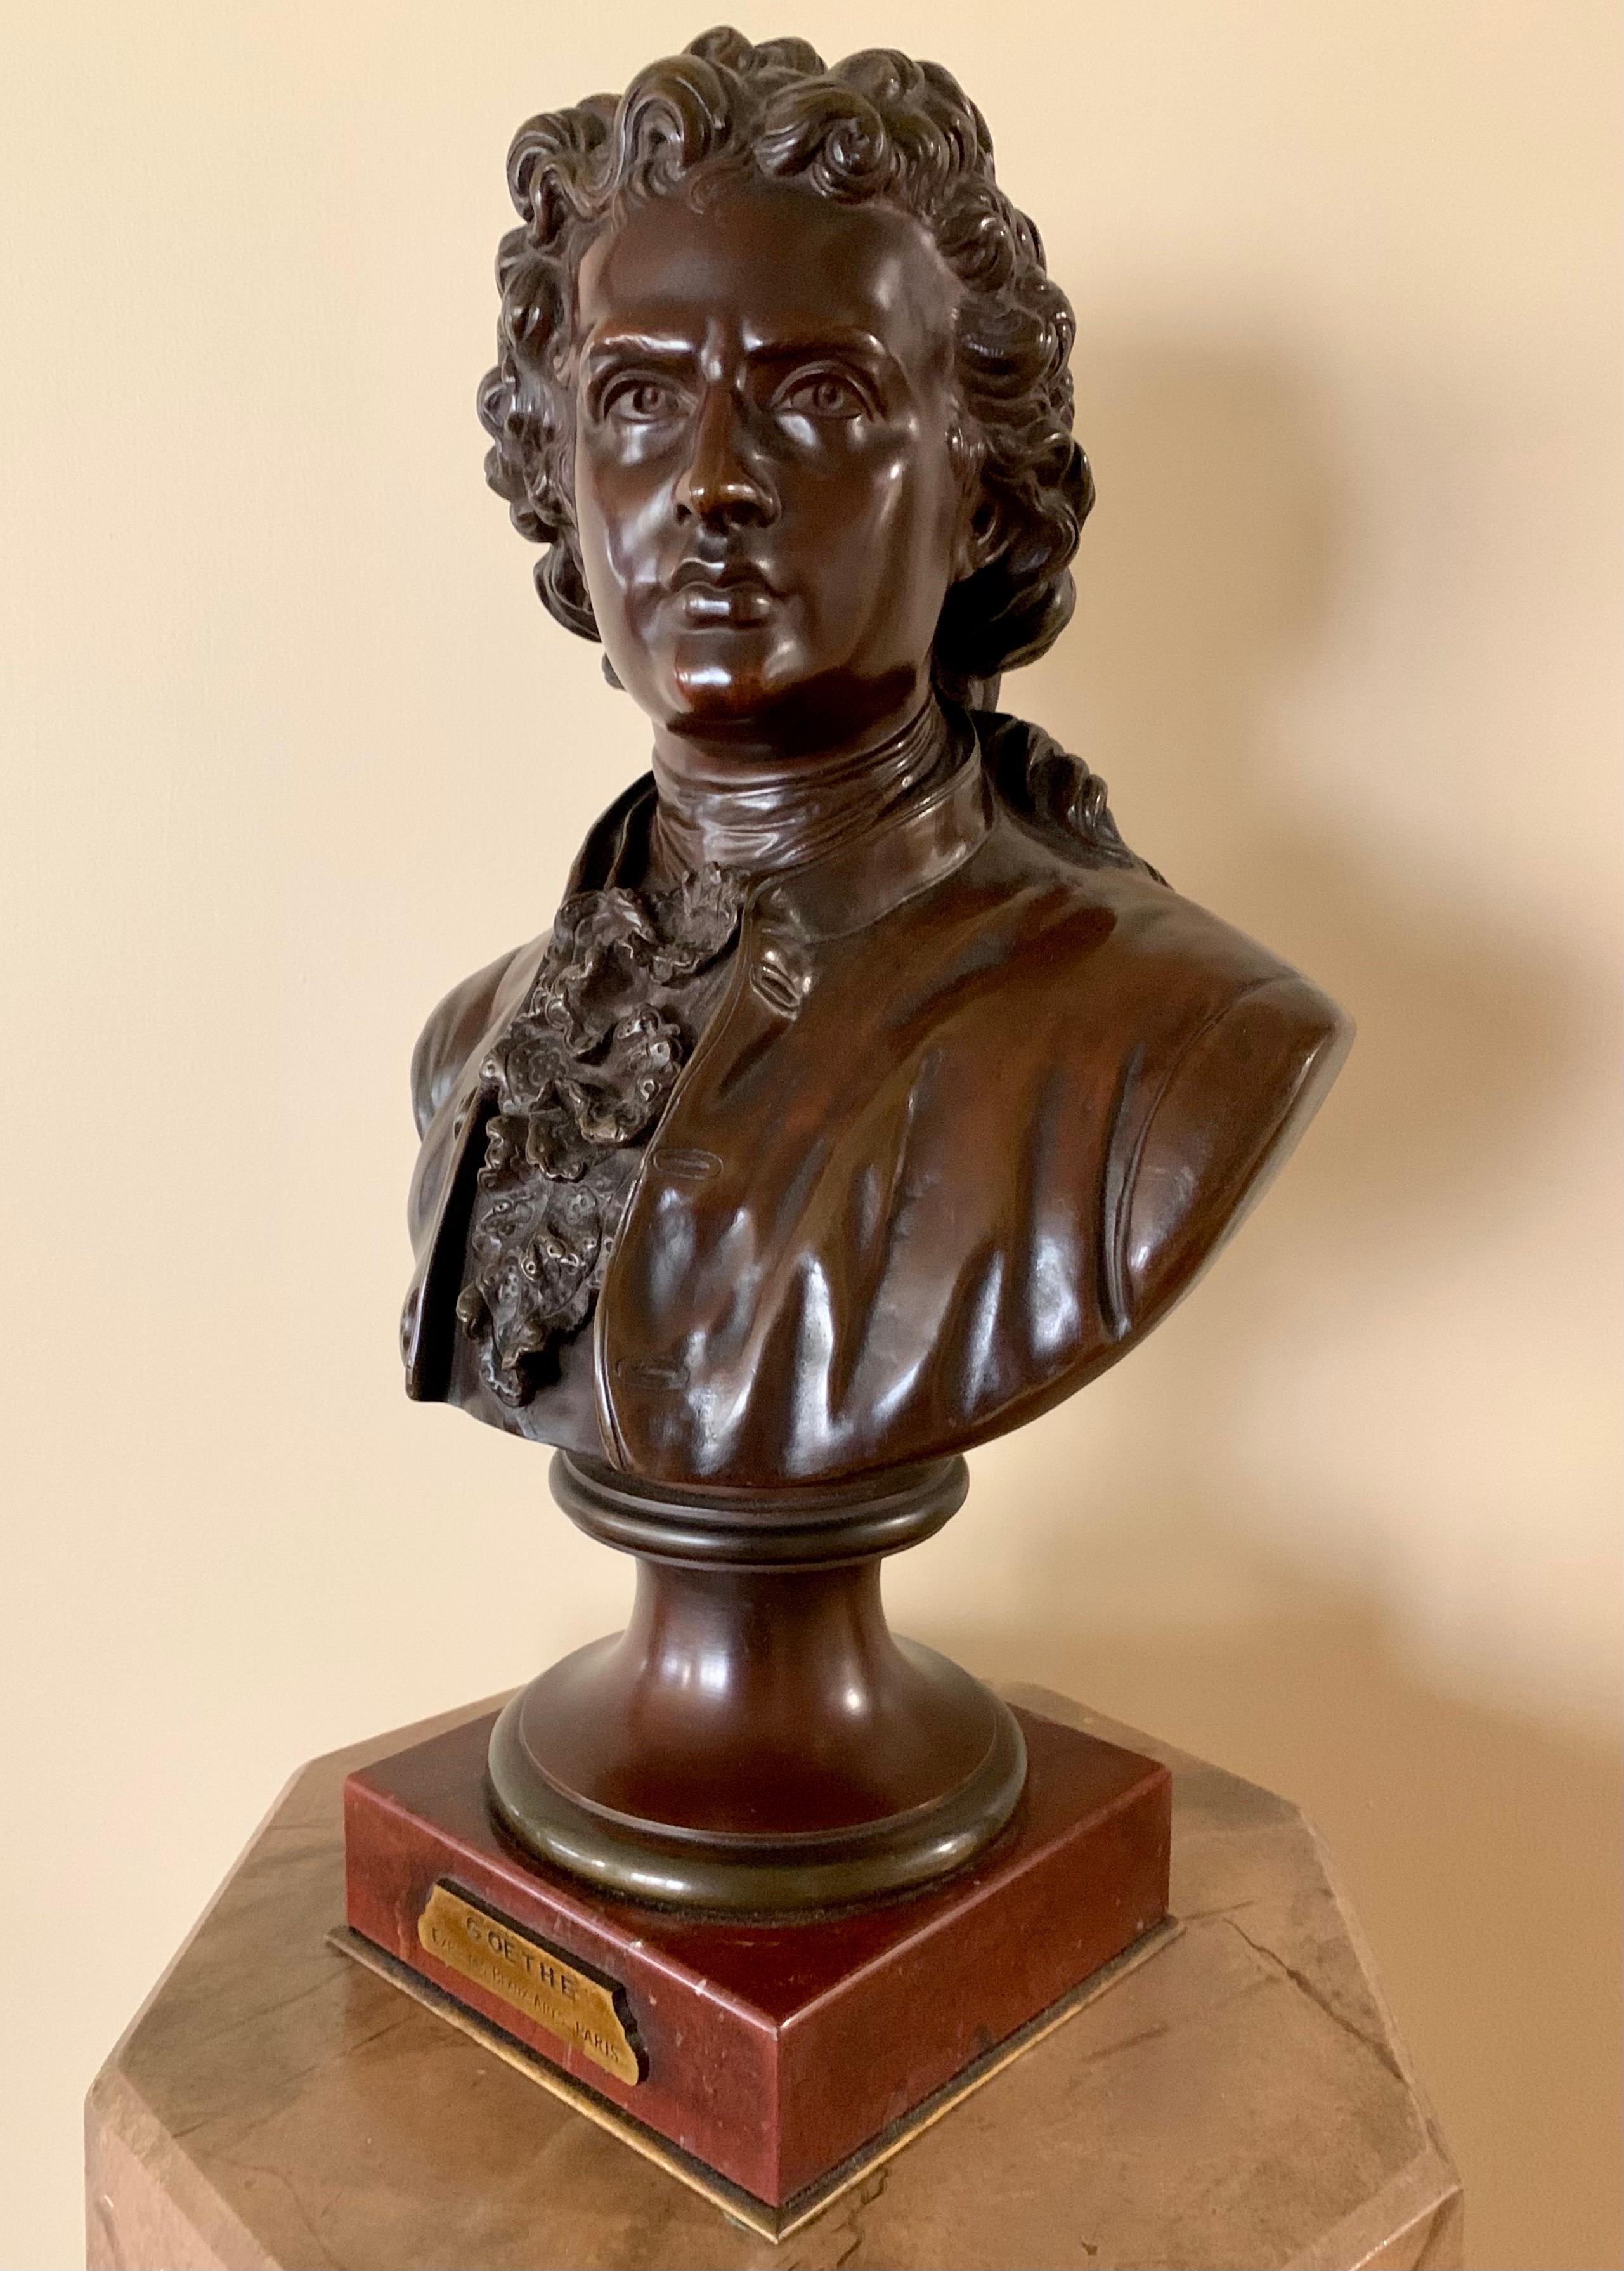 Large antique patinated bronze bust of Goethe, signed Pinedo, Exposition des Beaux Arts Paris 
Original Rouge Griote marble plinth with period Exposition plaque
Emile Pinedo, 1840-1916, was a highly regarded French sculptor specializing in